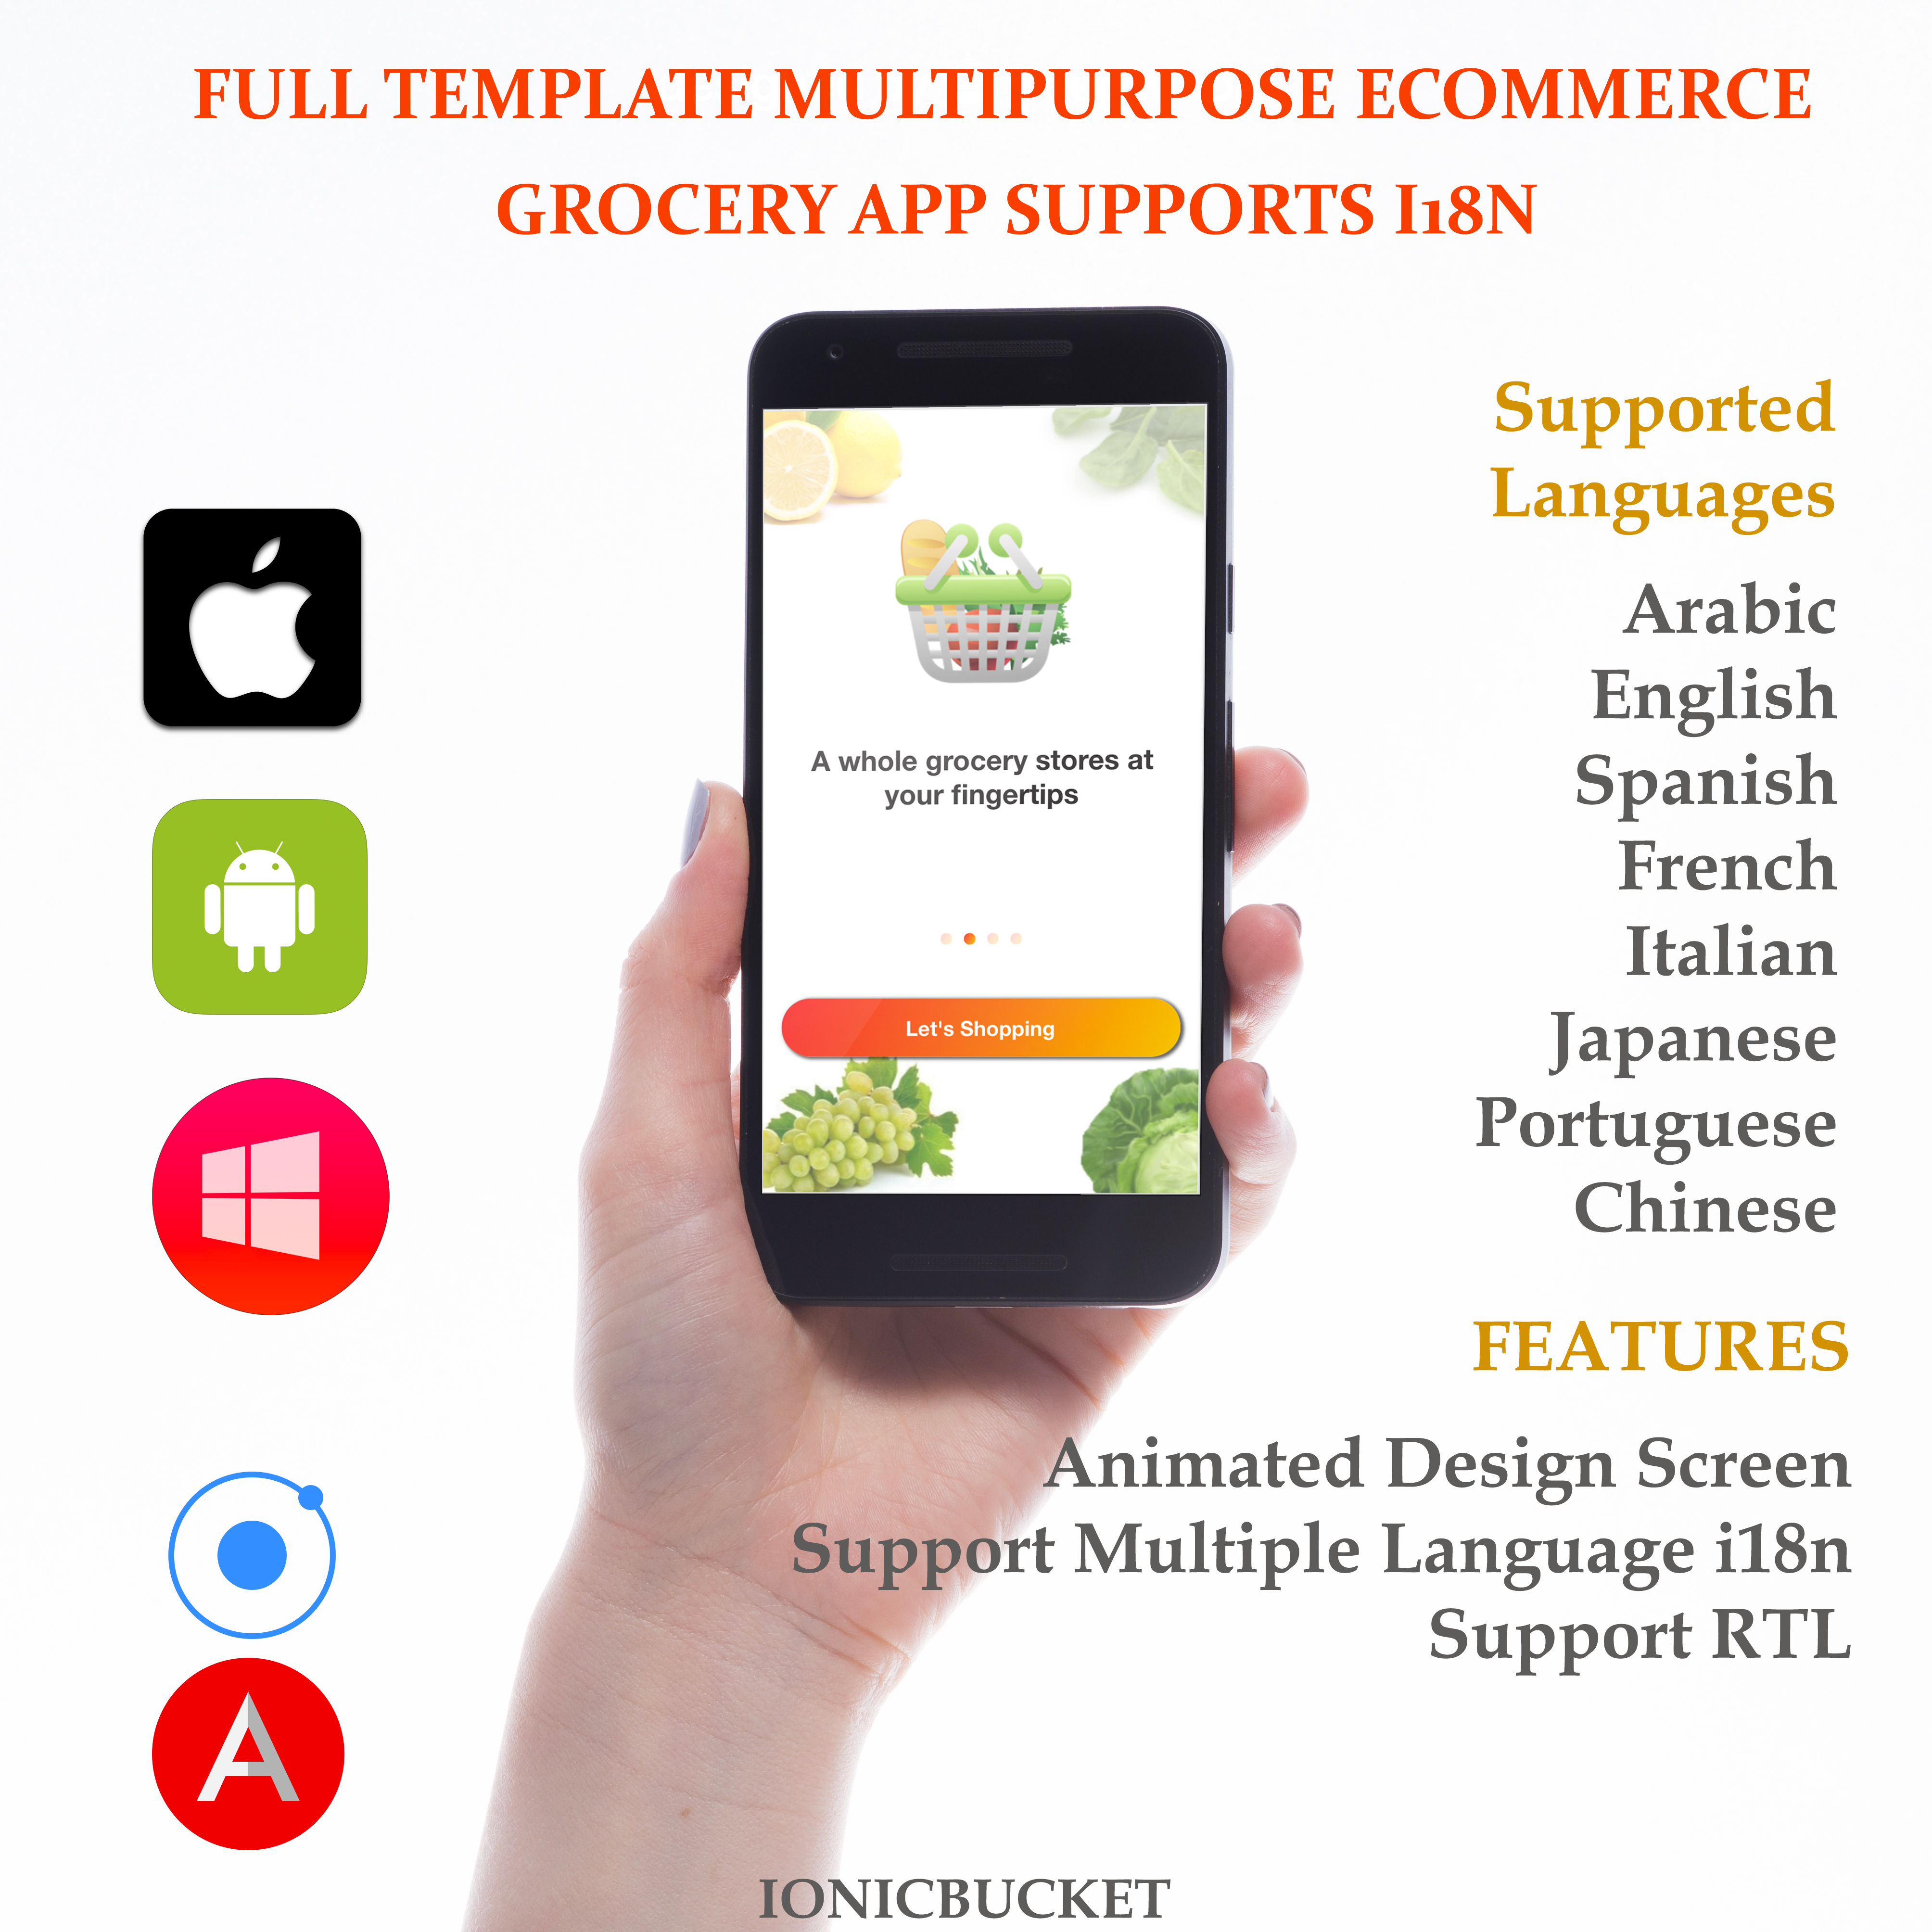 Complete Multipurpose eCommerce Template UI Grocery App Supports Multiple Language i18n - 3